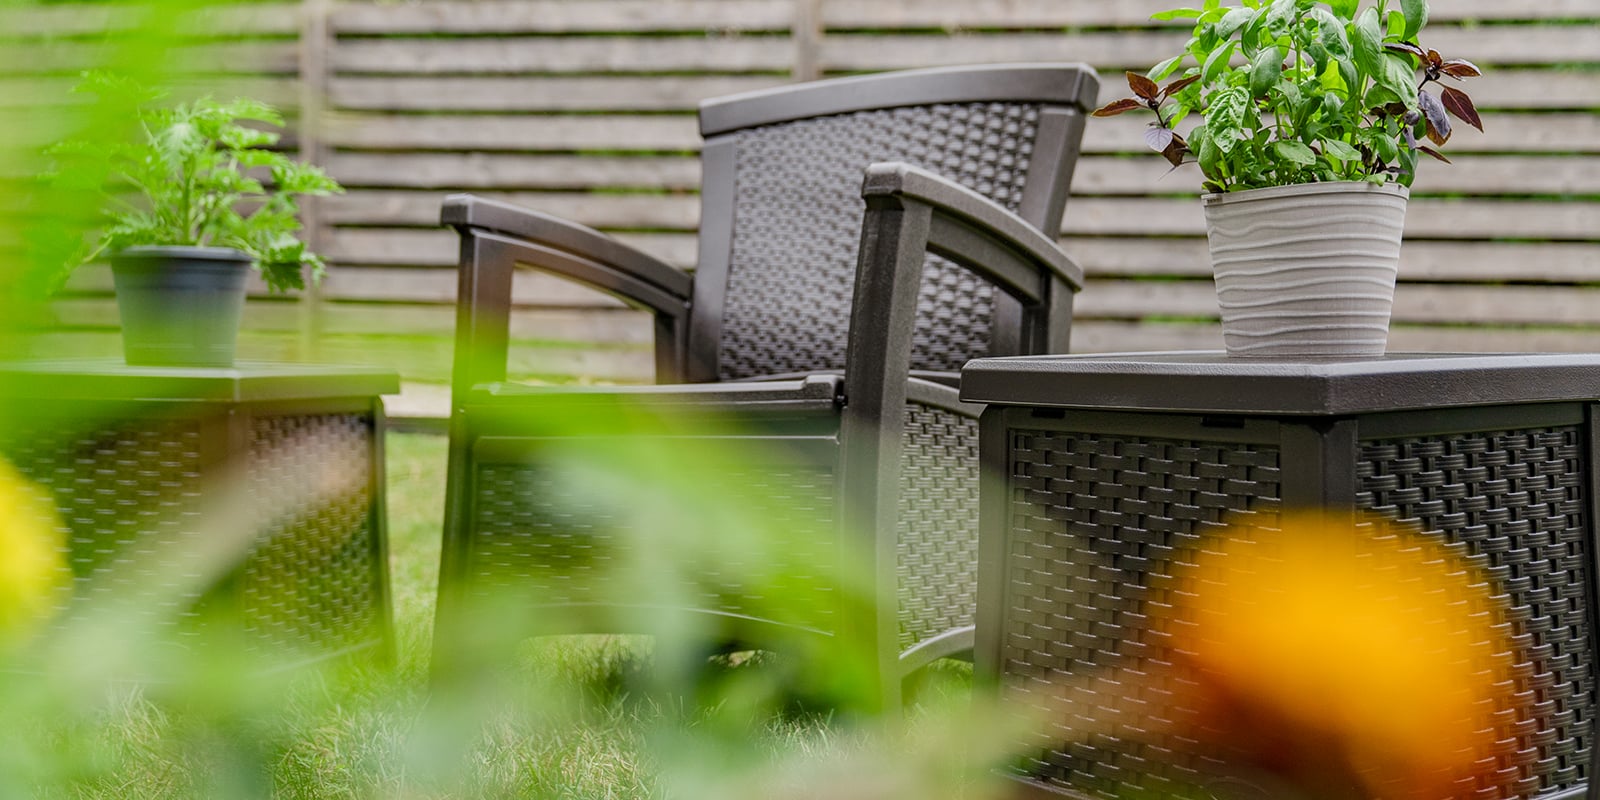 How To Keep Bugs Off Outdoor Furniture